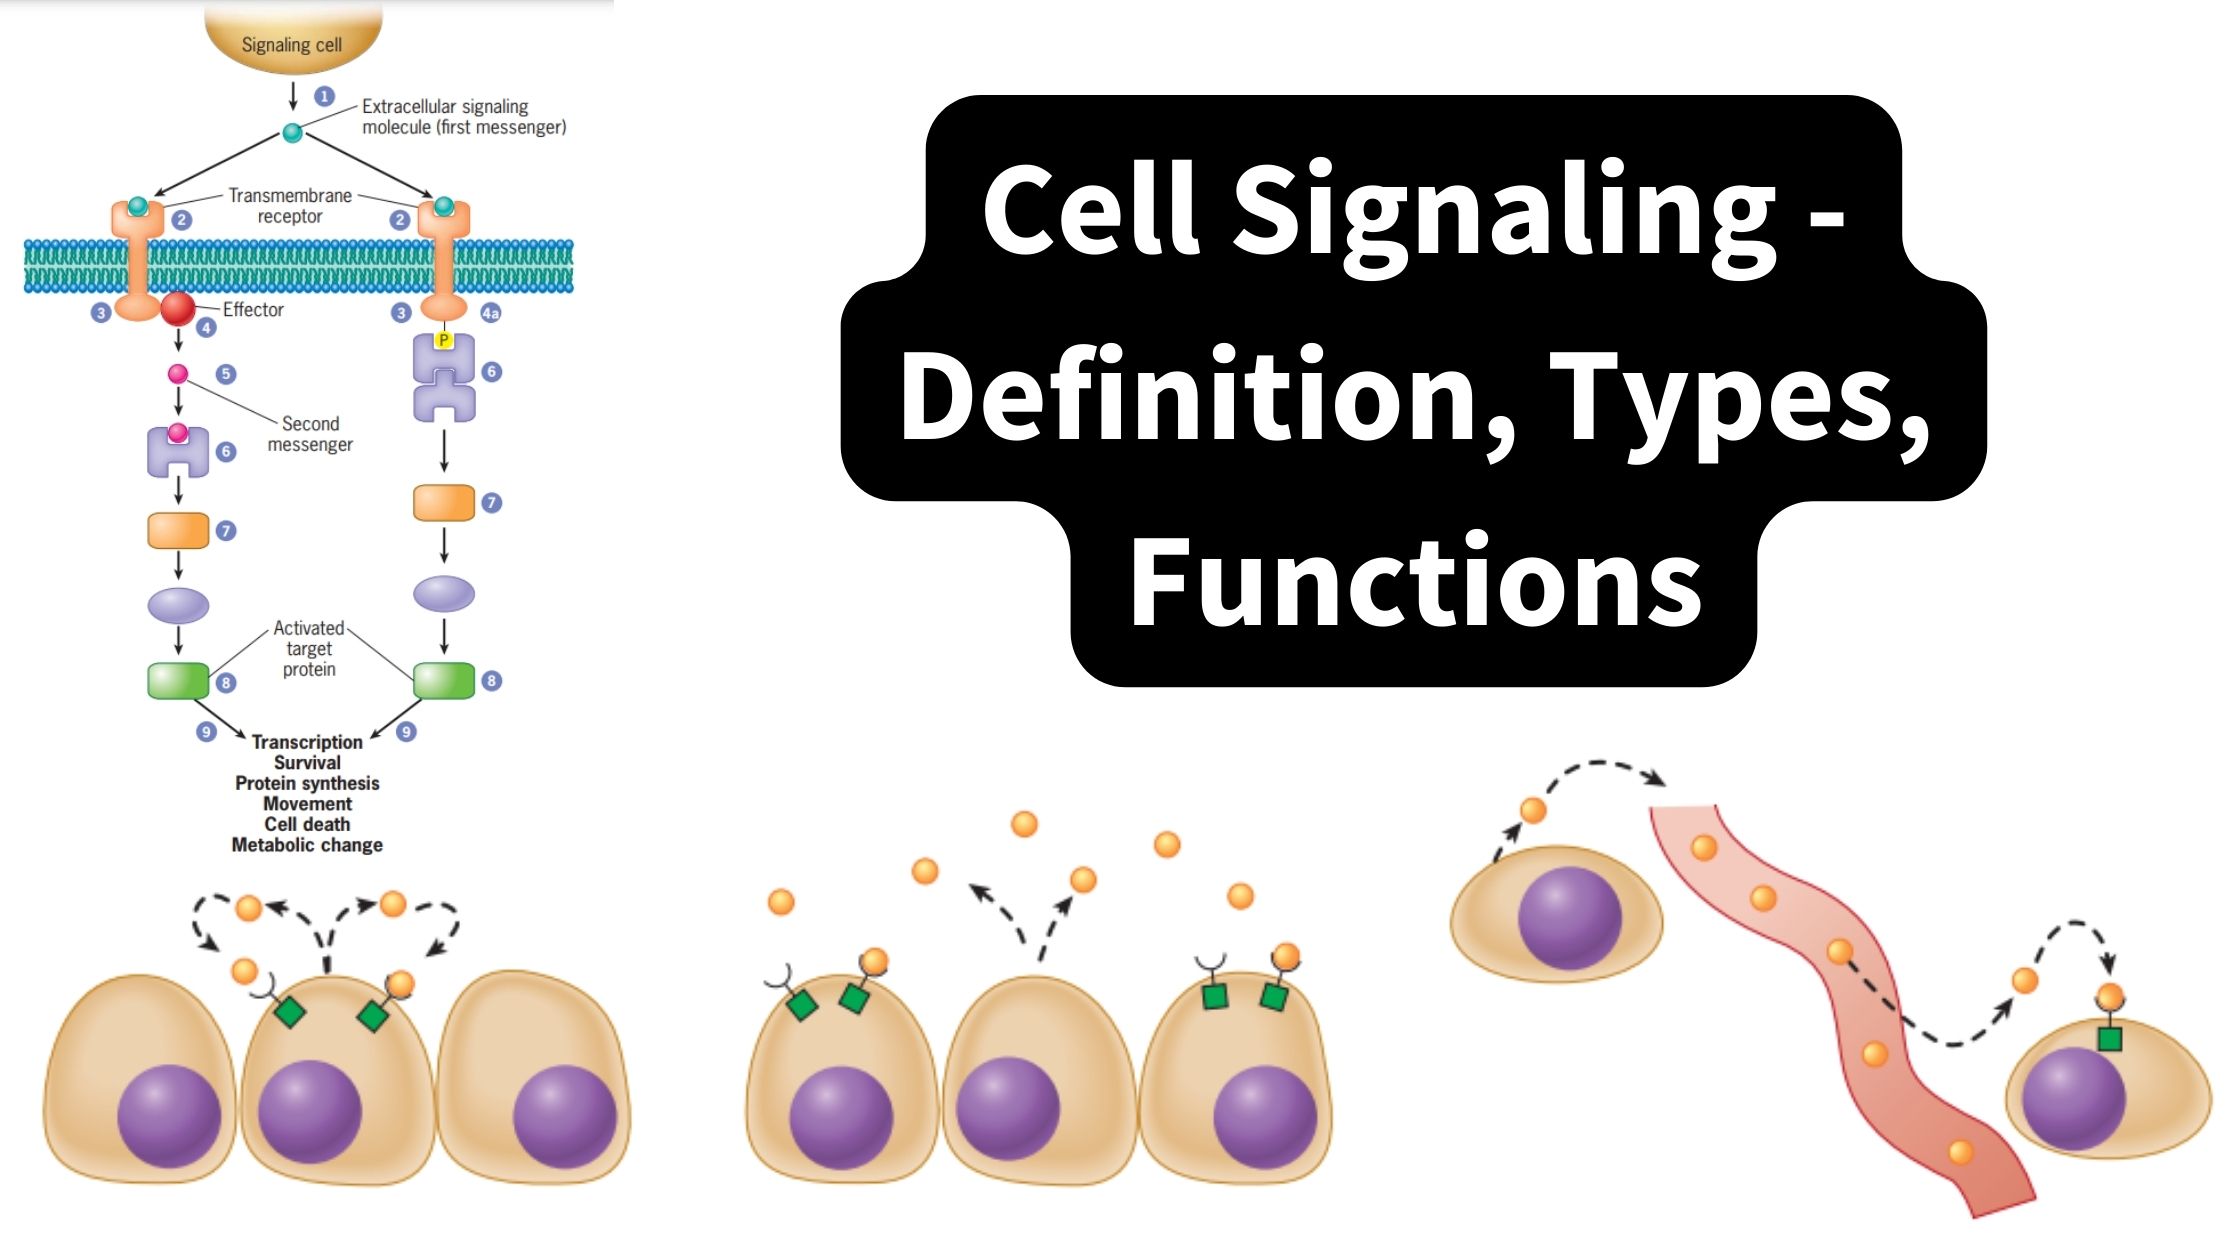 Cell Signaling - Definition, Types, Functions